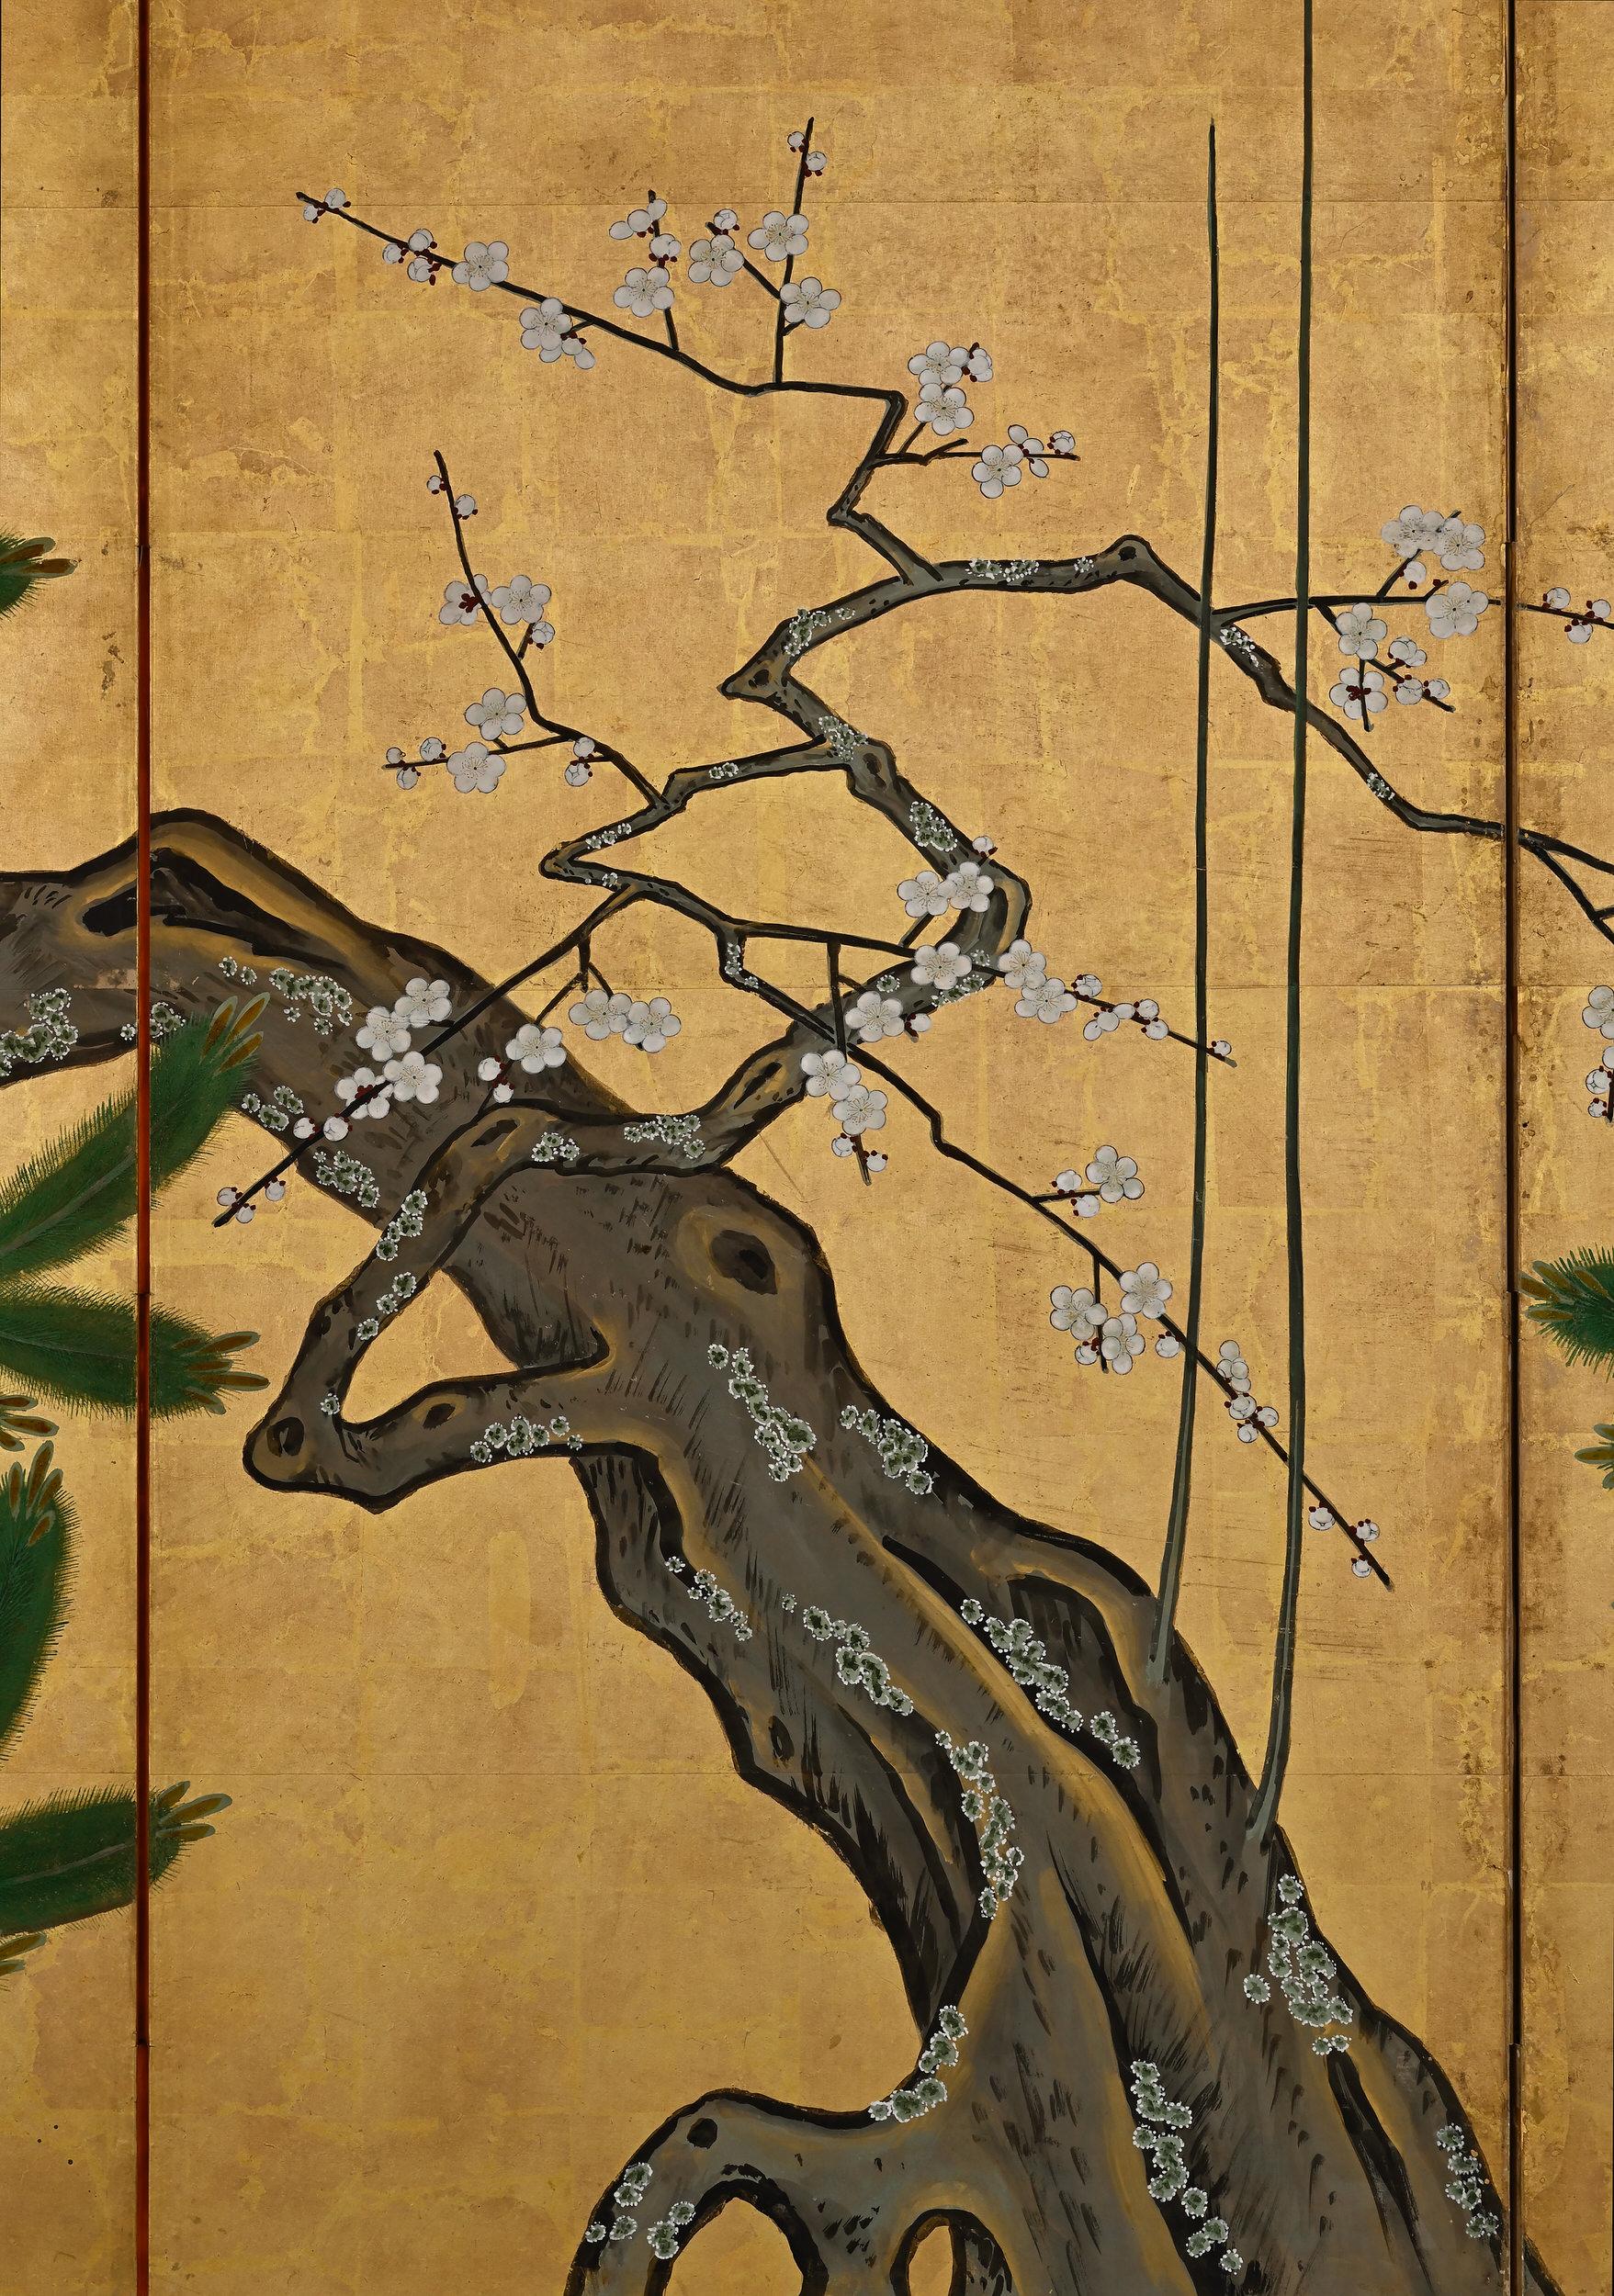 Hand-Painted 18th Century Japanese Screen Pair. Plum & Young Pines. Kano School. For Sale